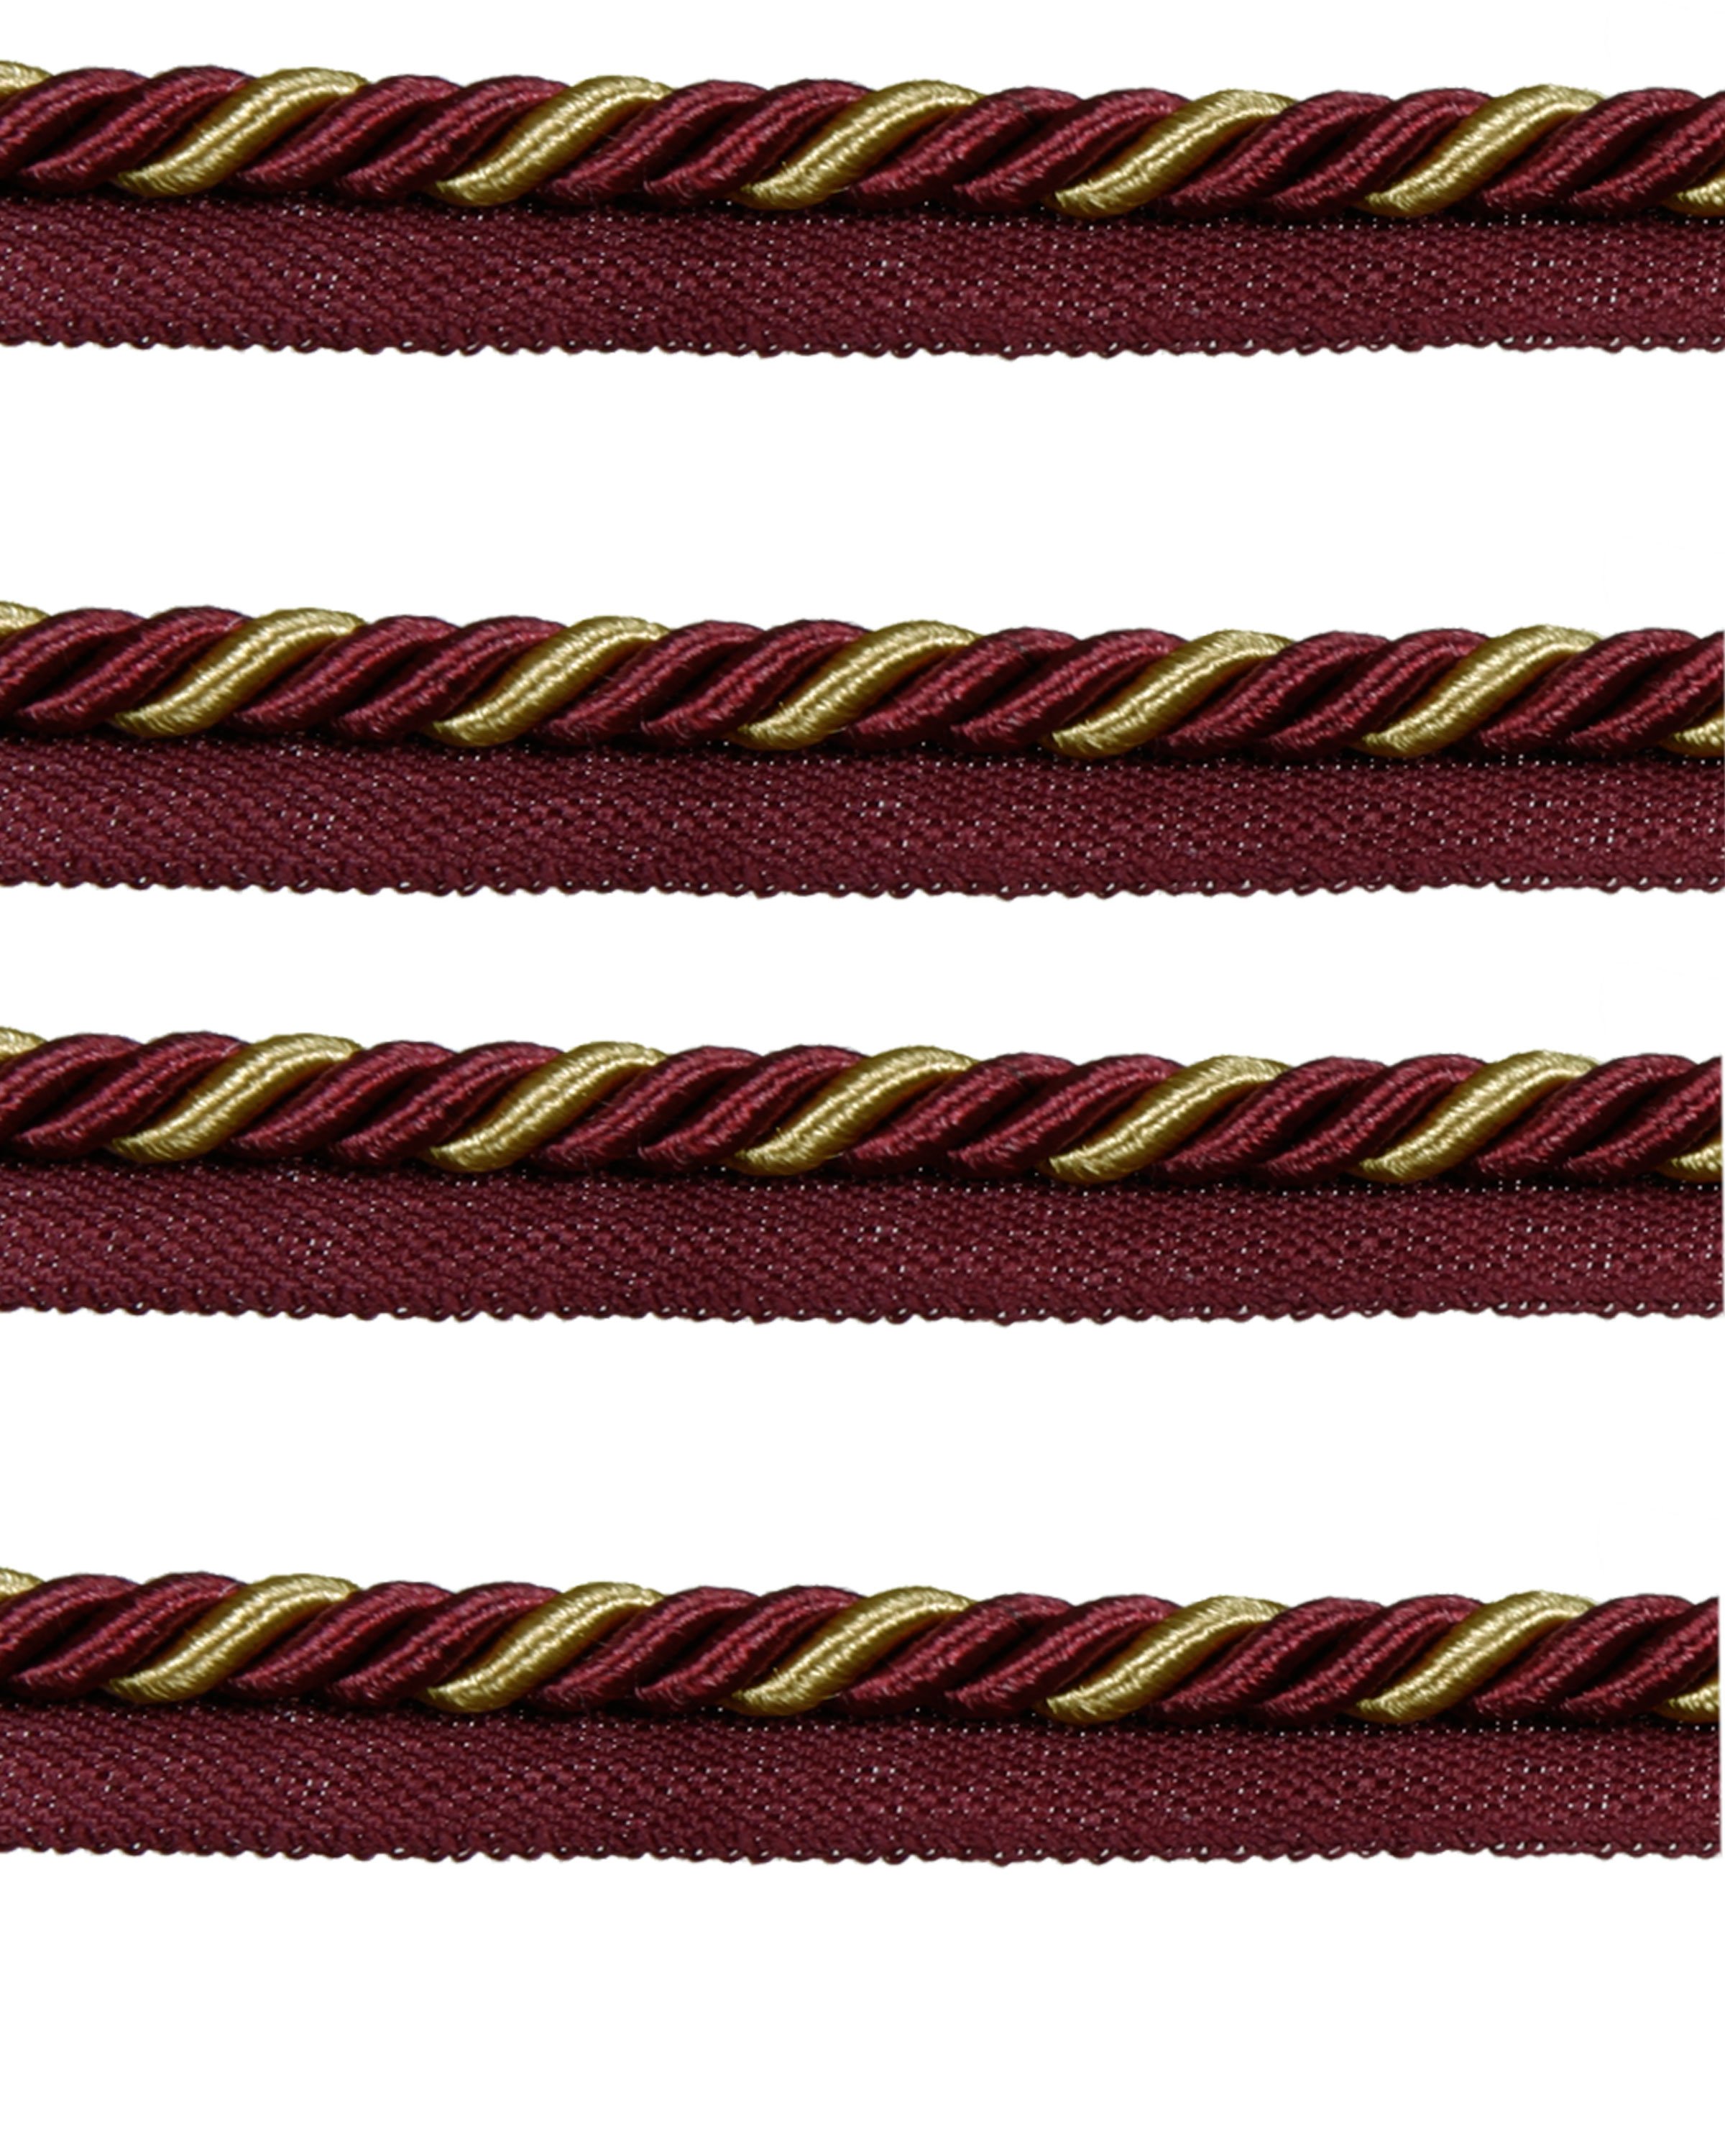 Piping Cord 2-8mm Tone Twist on Tape - Gold / Red Wine Price is for 5 metres 